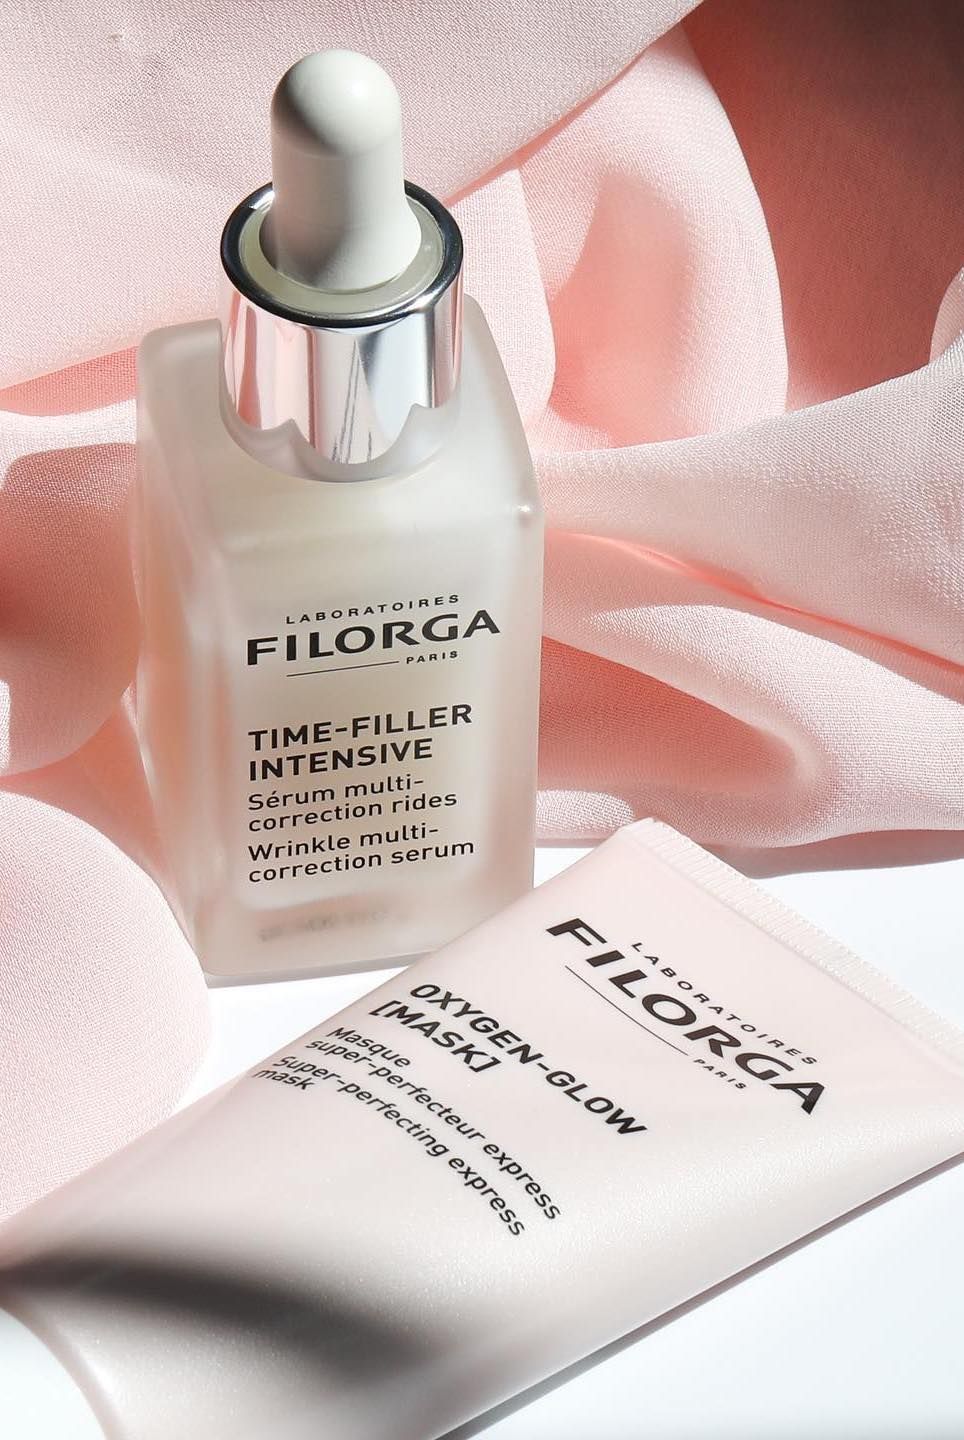 best Filorga products fueltheglow